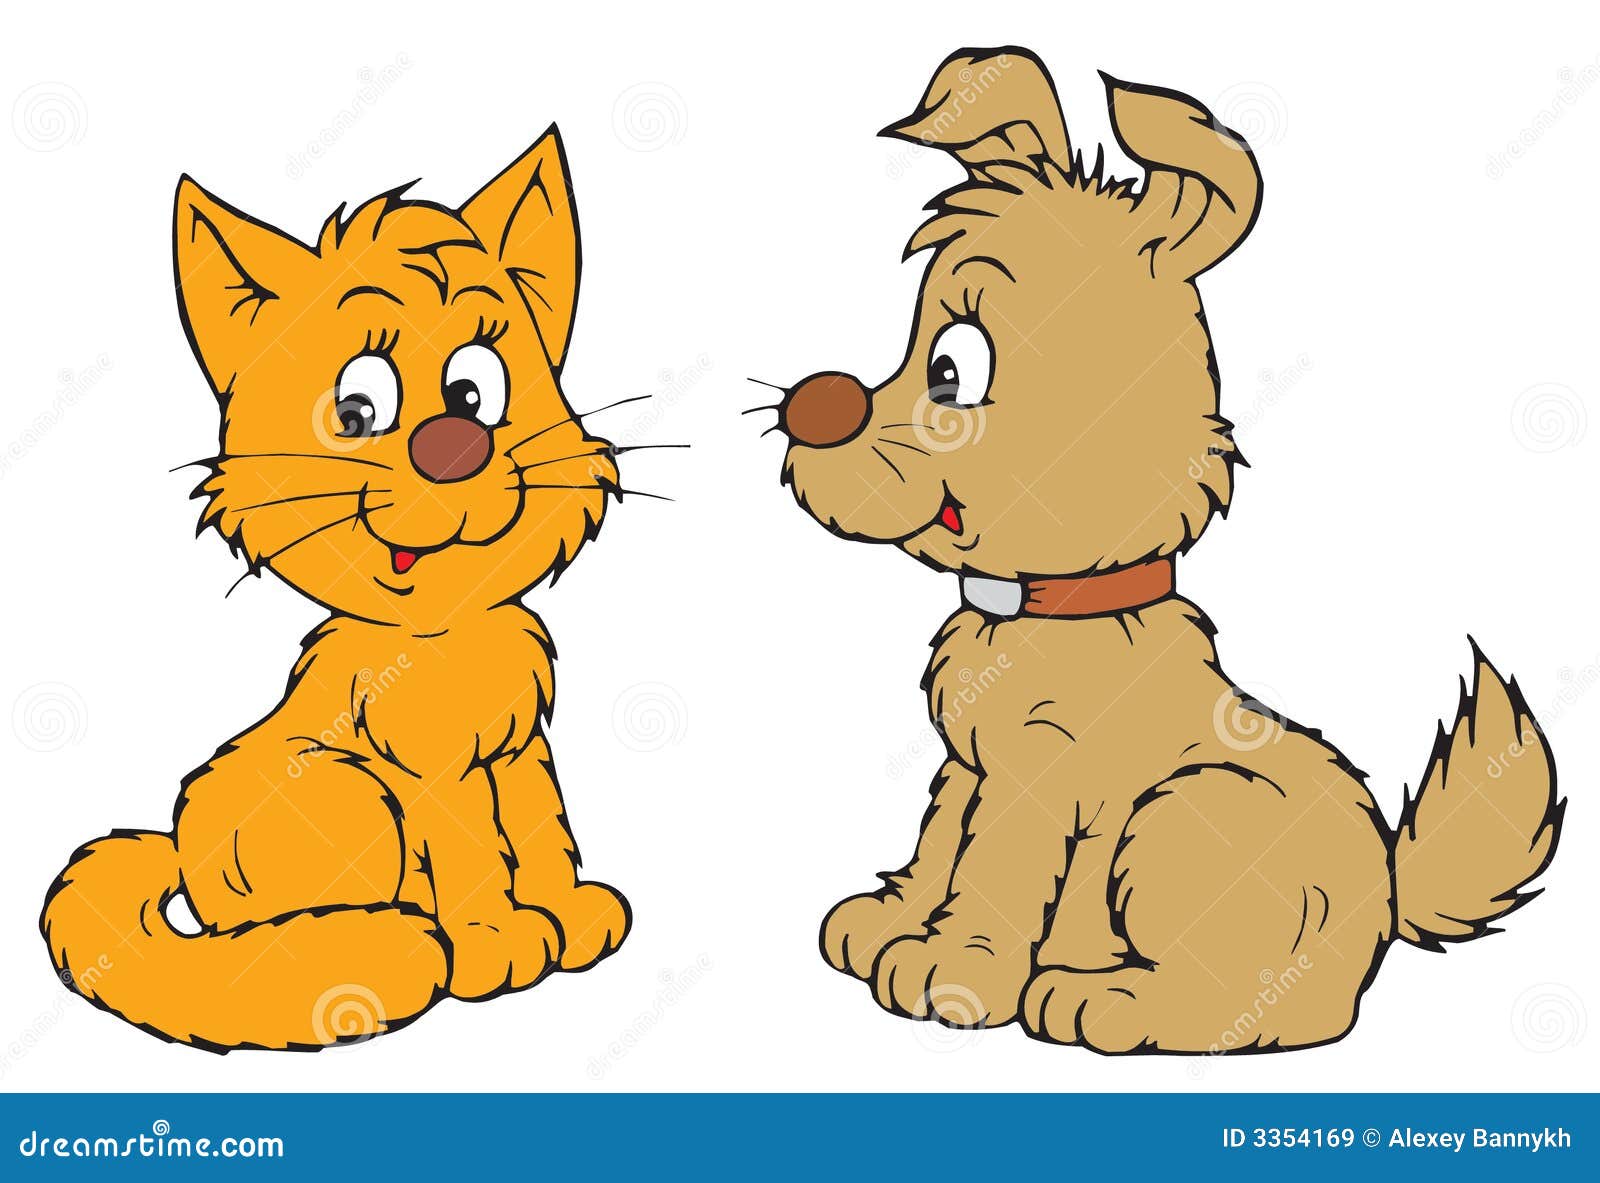 clipart of pets - photo #41